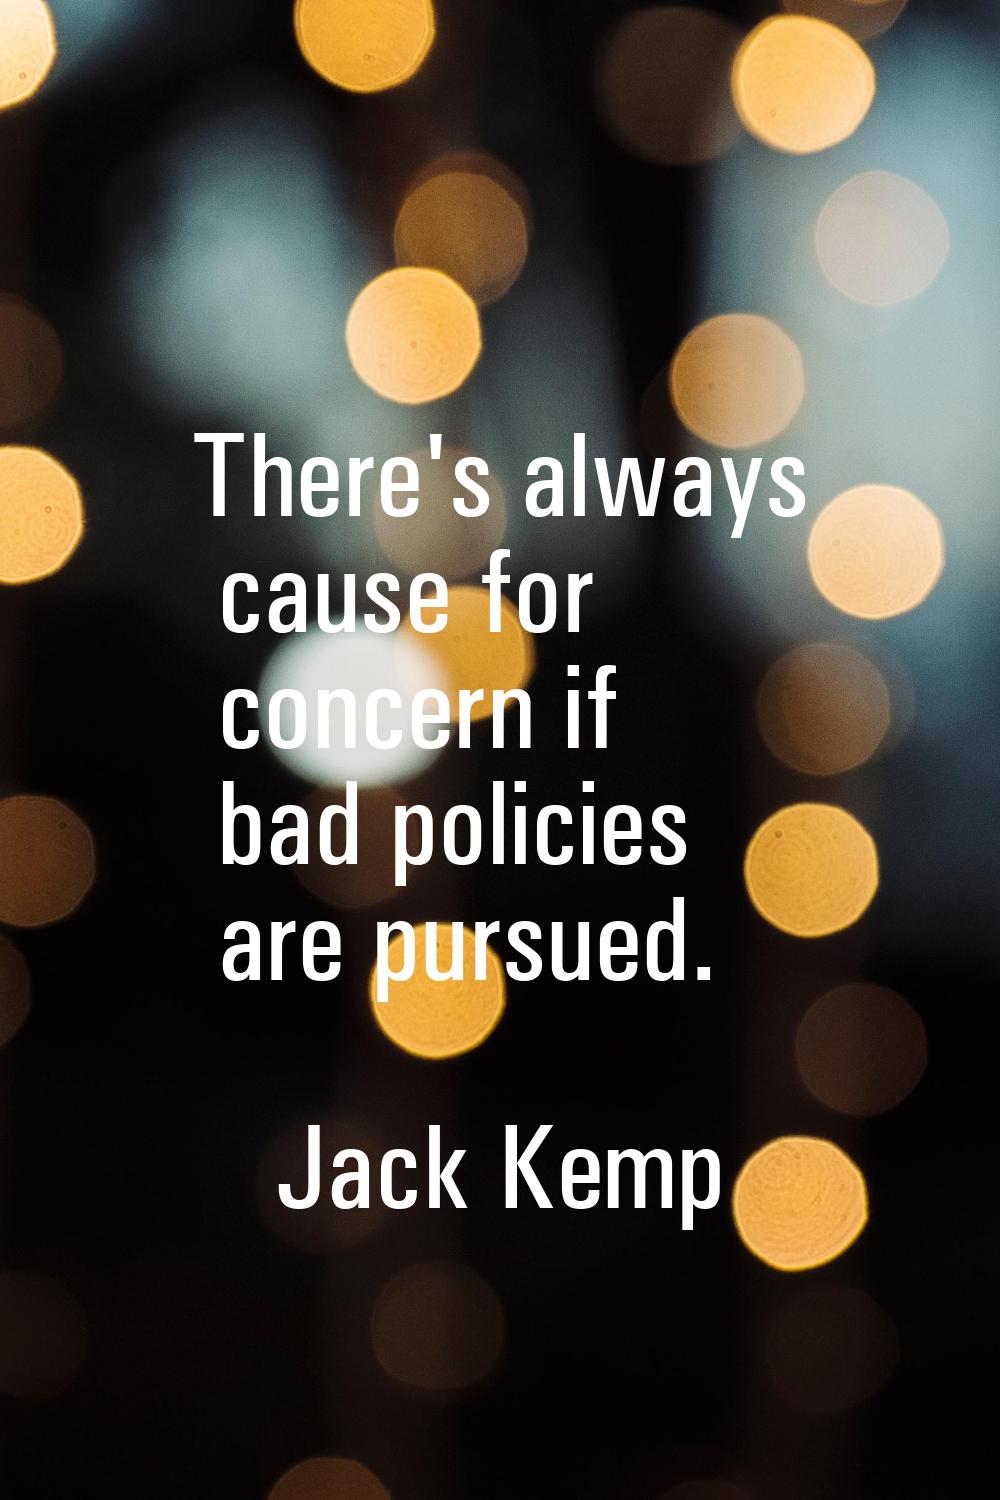 There's always cause for concern if bad policies are pursued.